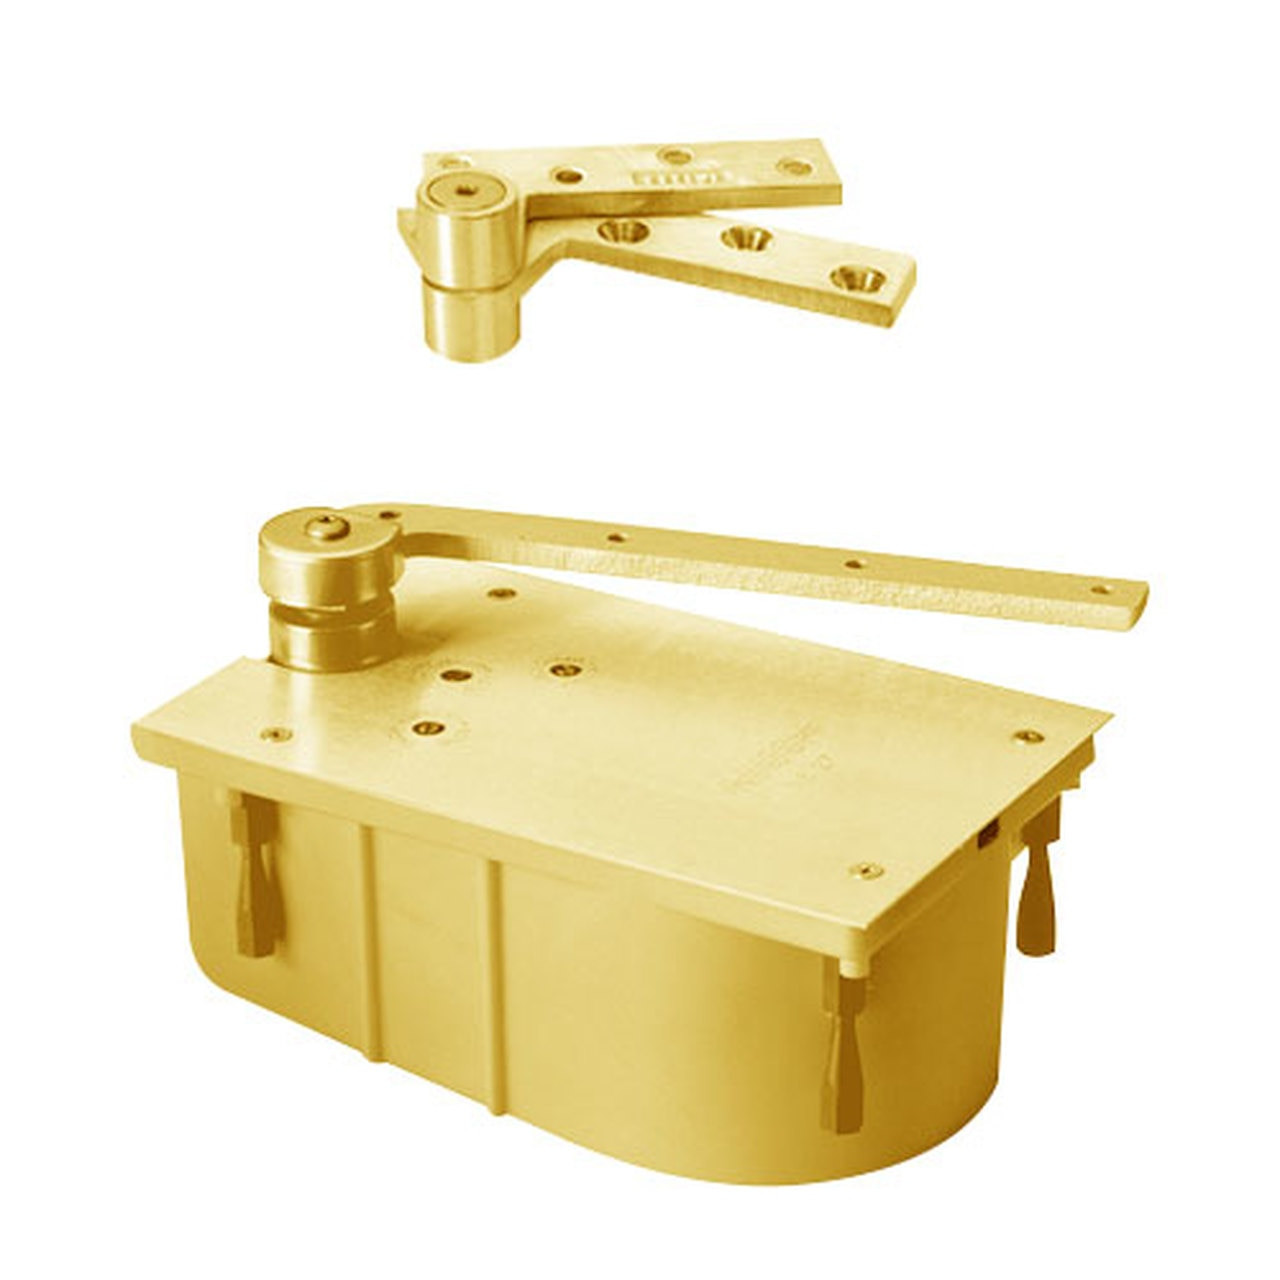 F127-95N-LTP-LH-605 Rixson 27 Series Fire Rated Heavy Duty 3/4" Offset Hung Floor Closer in Bright Brass Finish